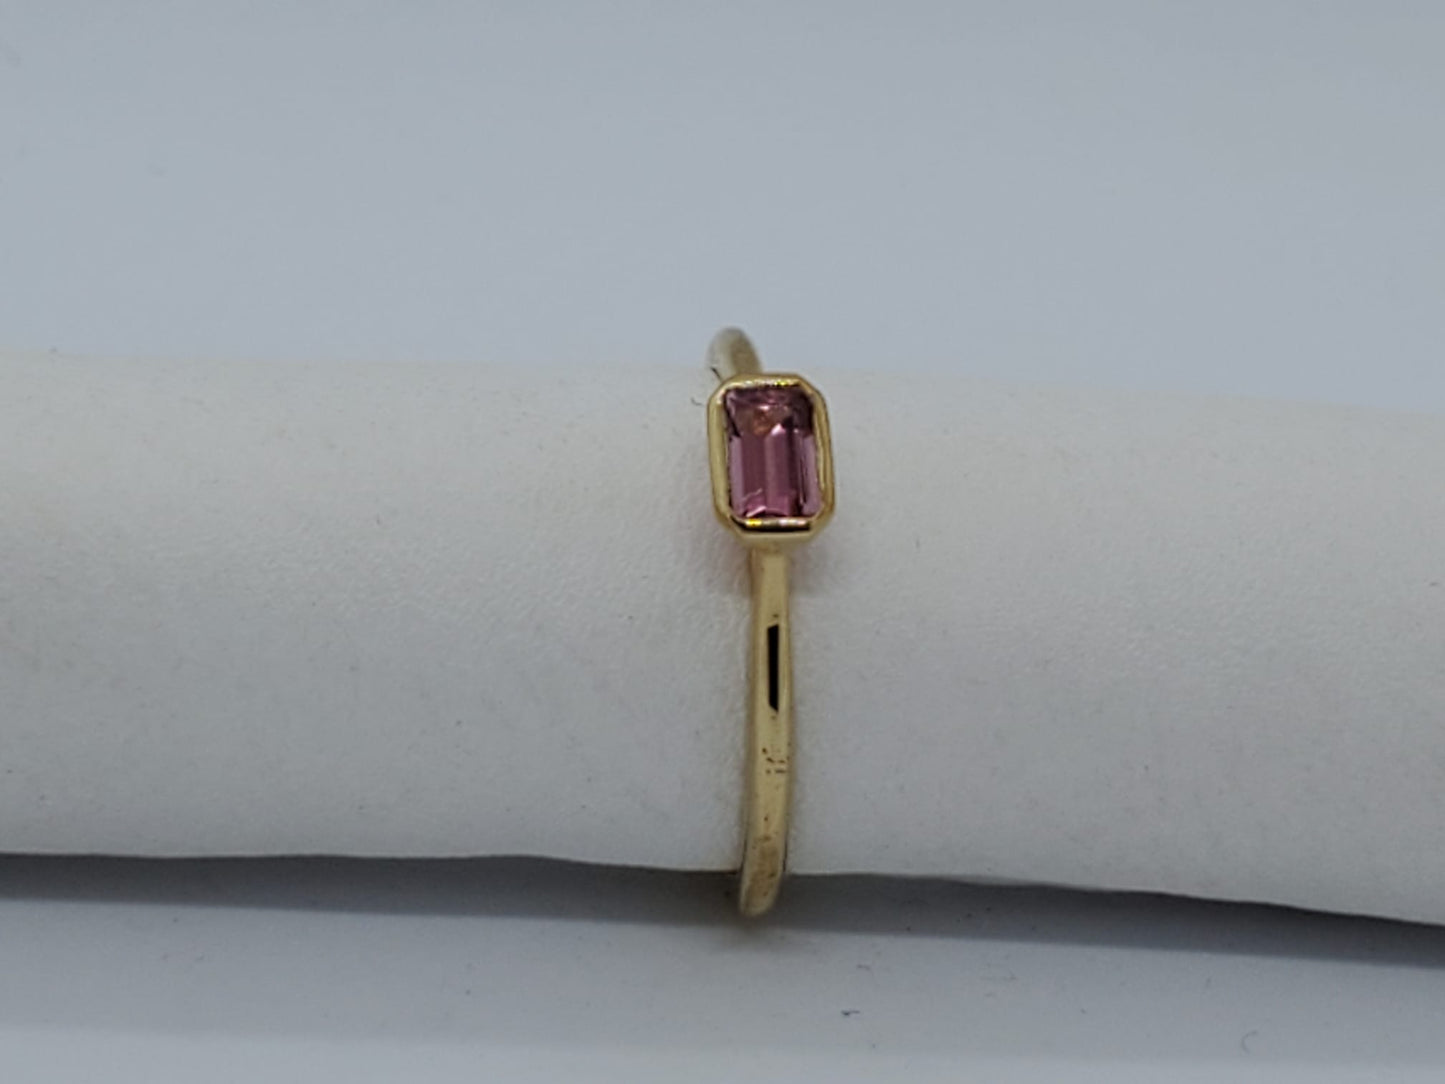 14k solitaire ring with emerald cut tourmaline stone, daily wear ring